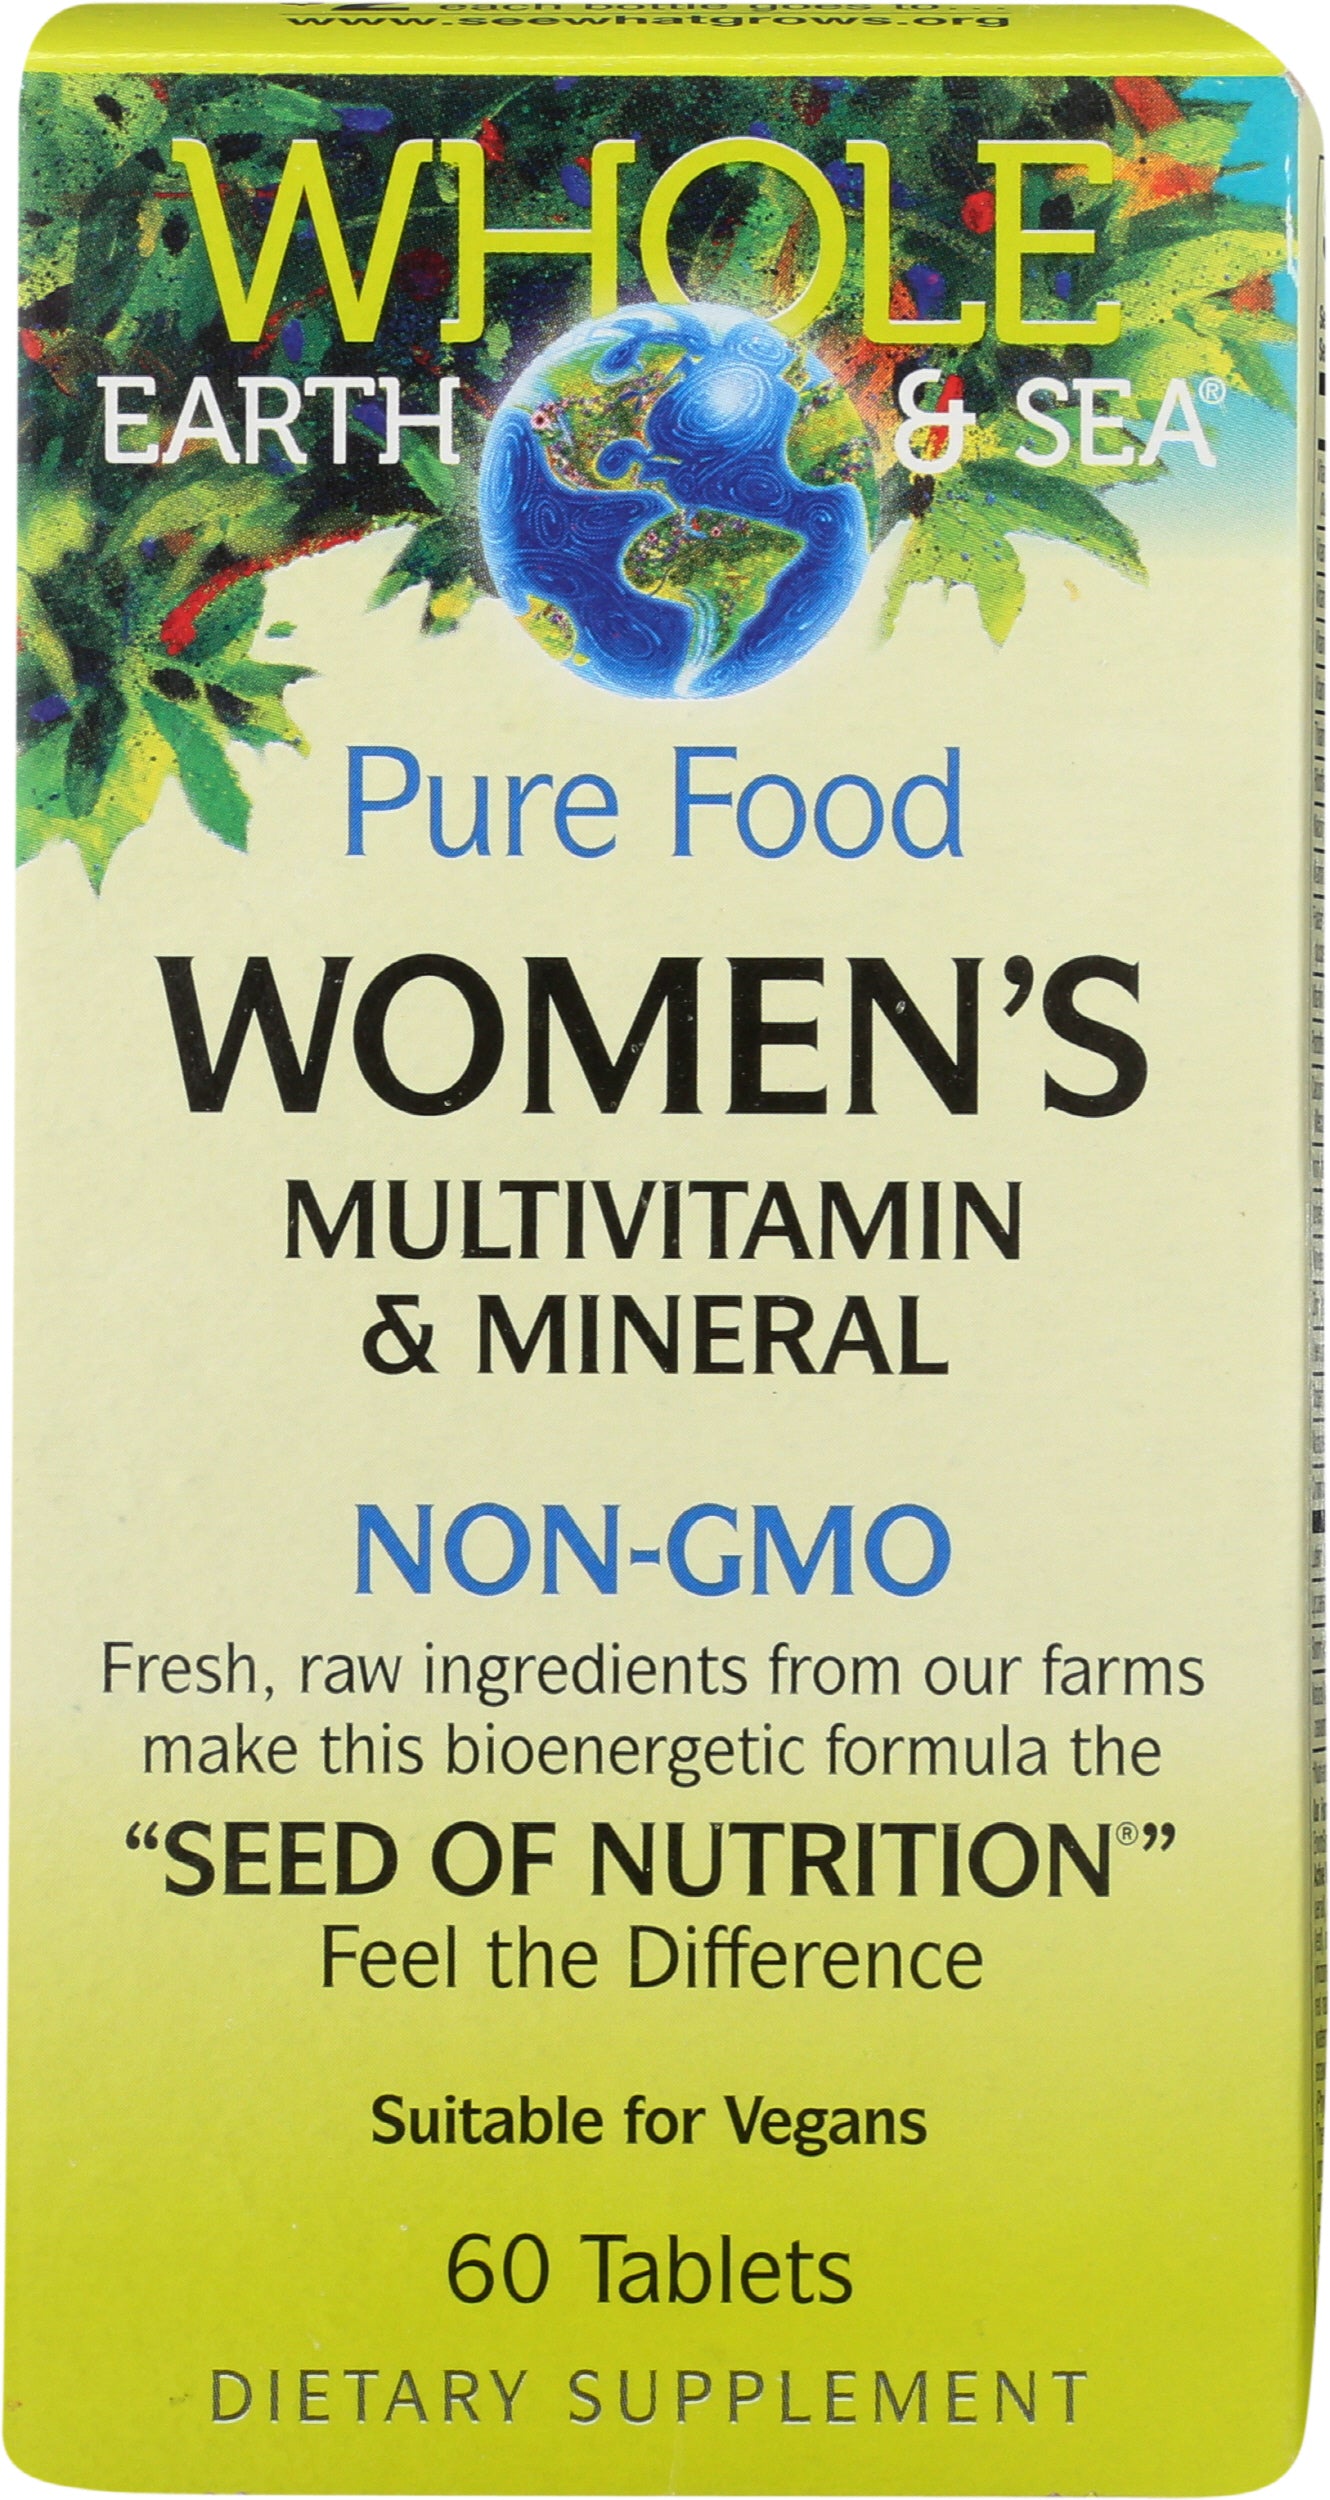 Whole Earth & Sea Women's Multivitamin 60 Tablets Front of Box